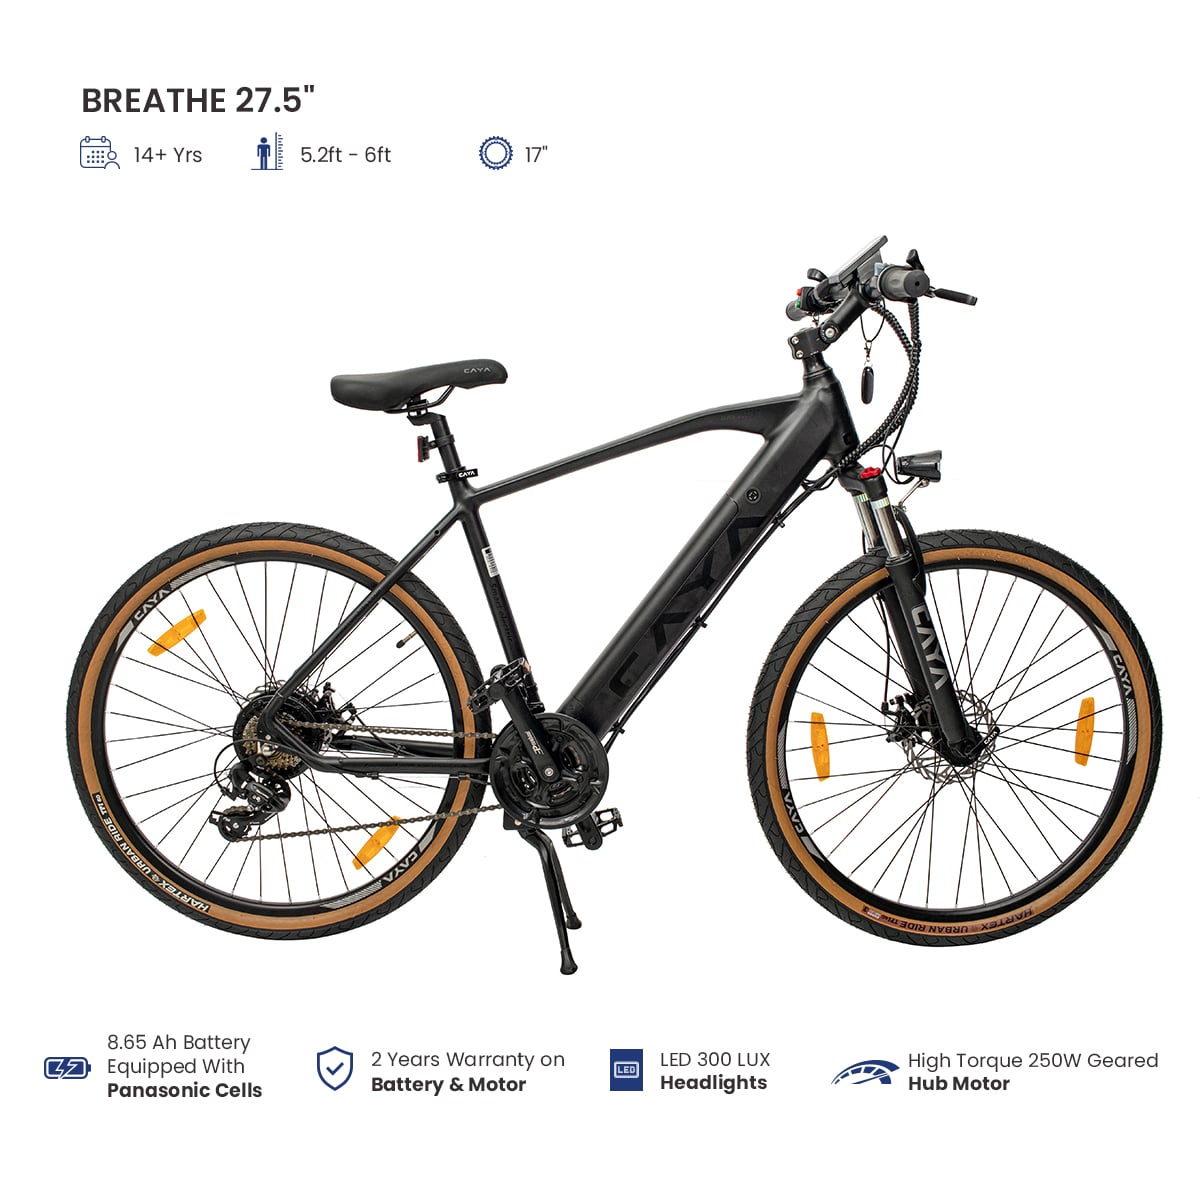 CAYA Breathe 27.5 Electric Bicycle